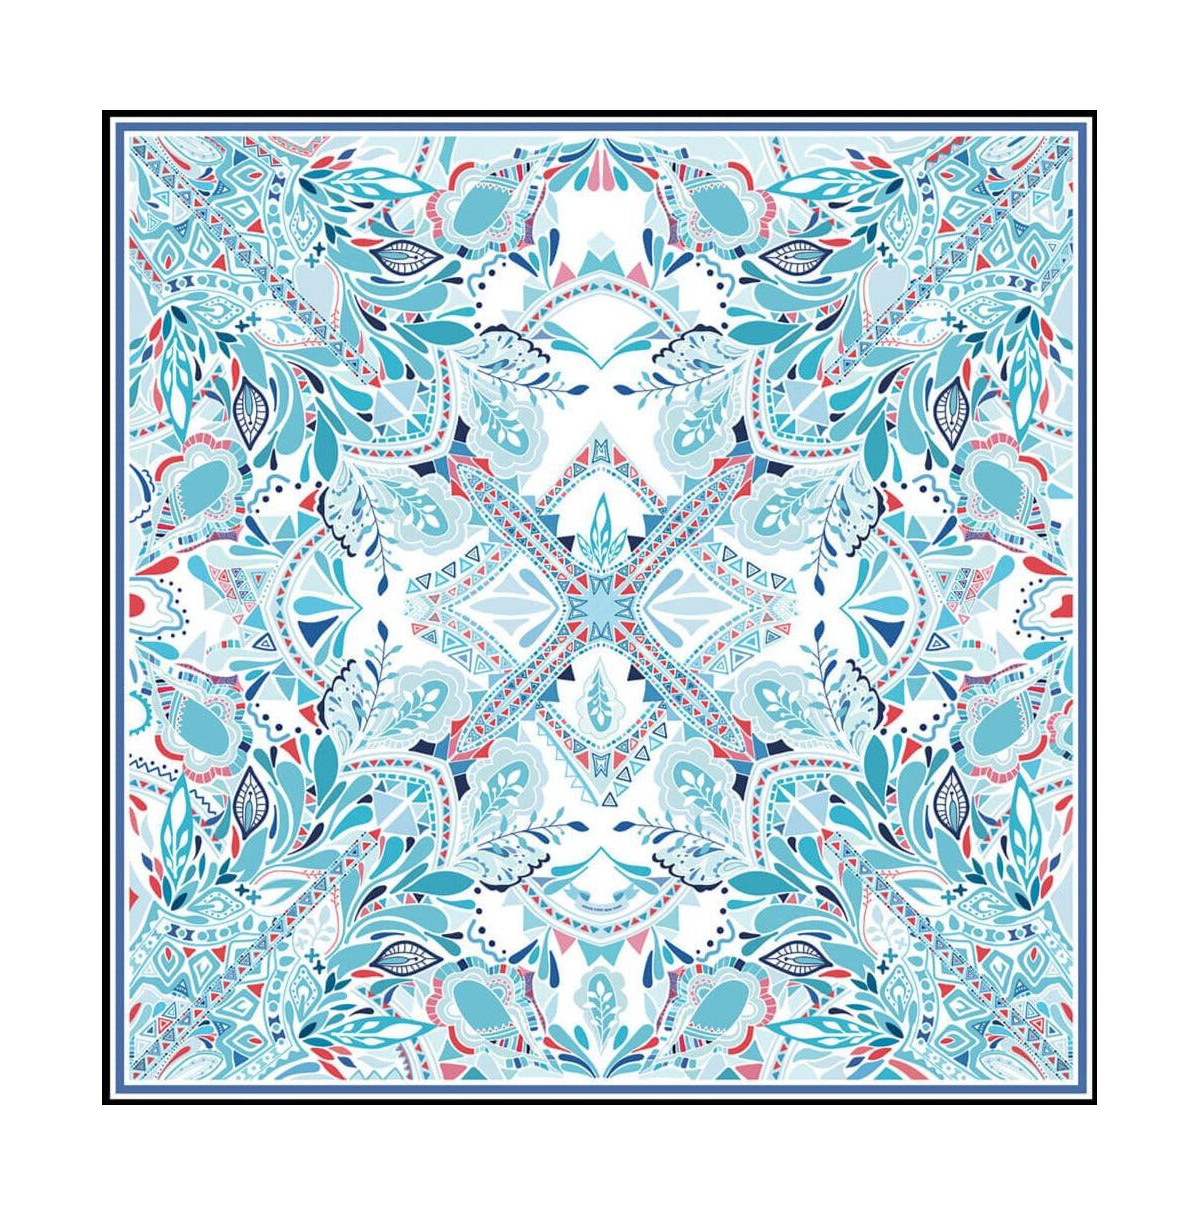 Silk Scarf of The Ocean - Blue and white